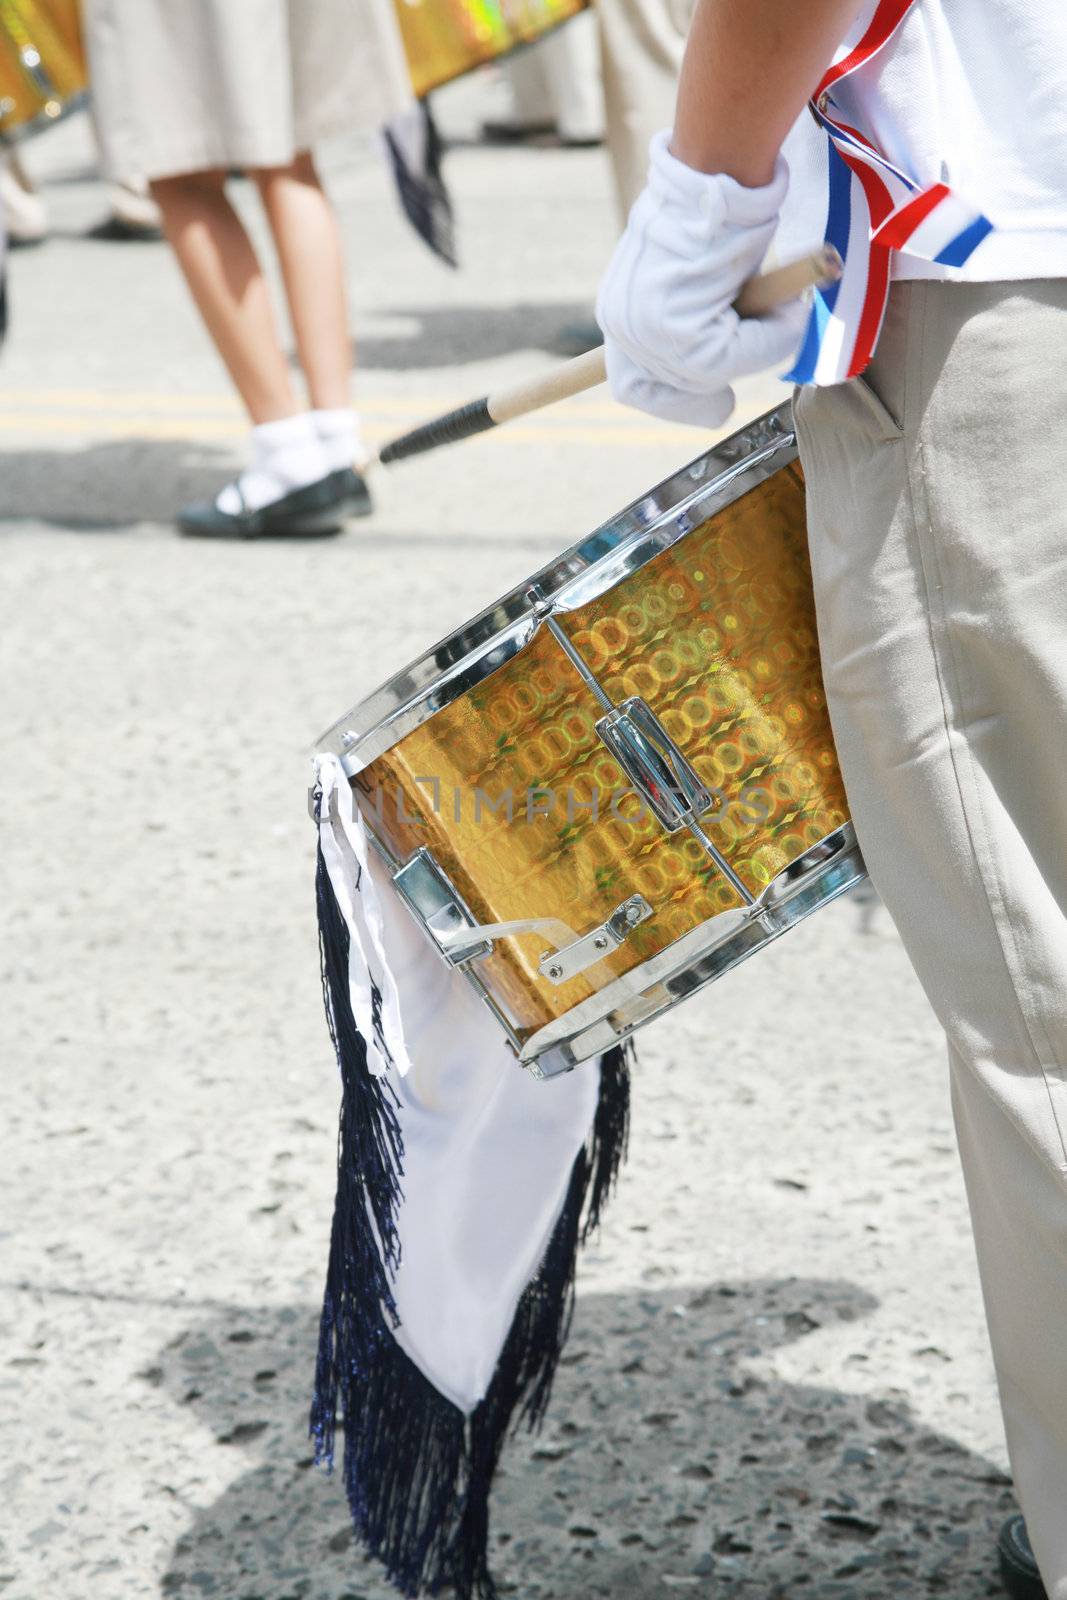 Drummer playing snare drums in parade, copy space, vertical